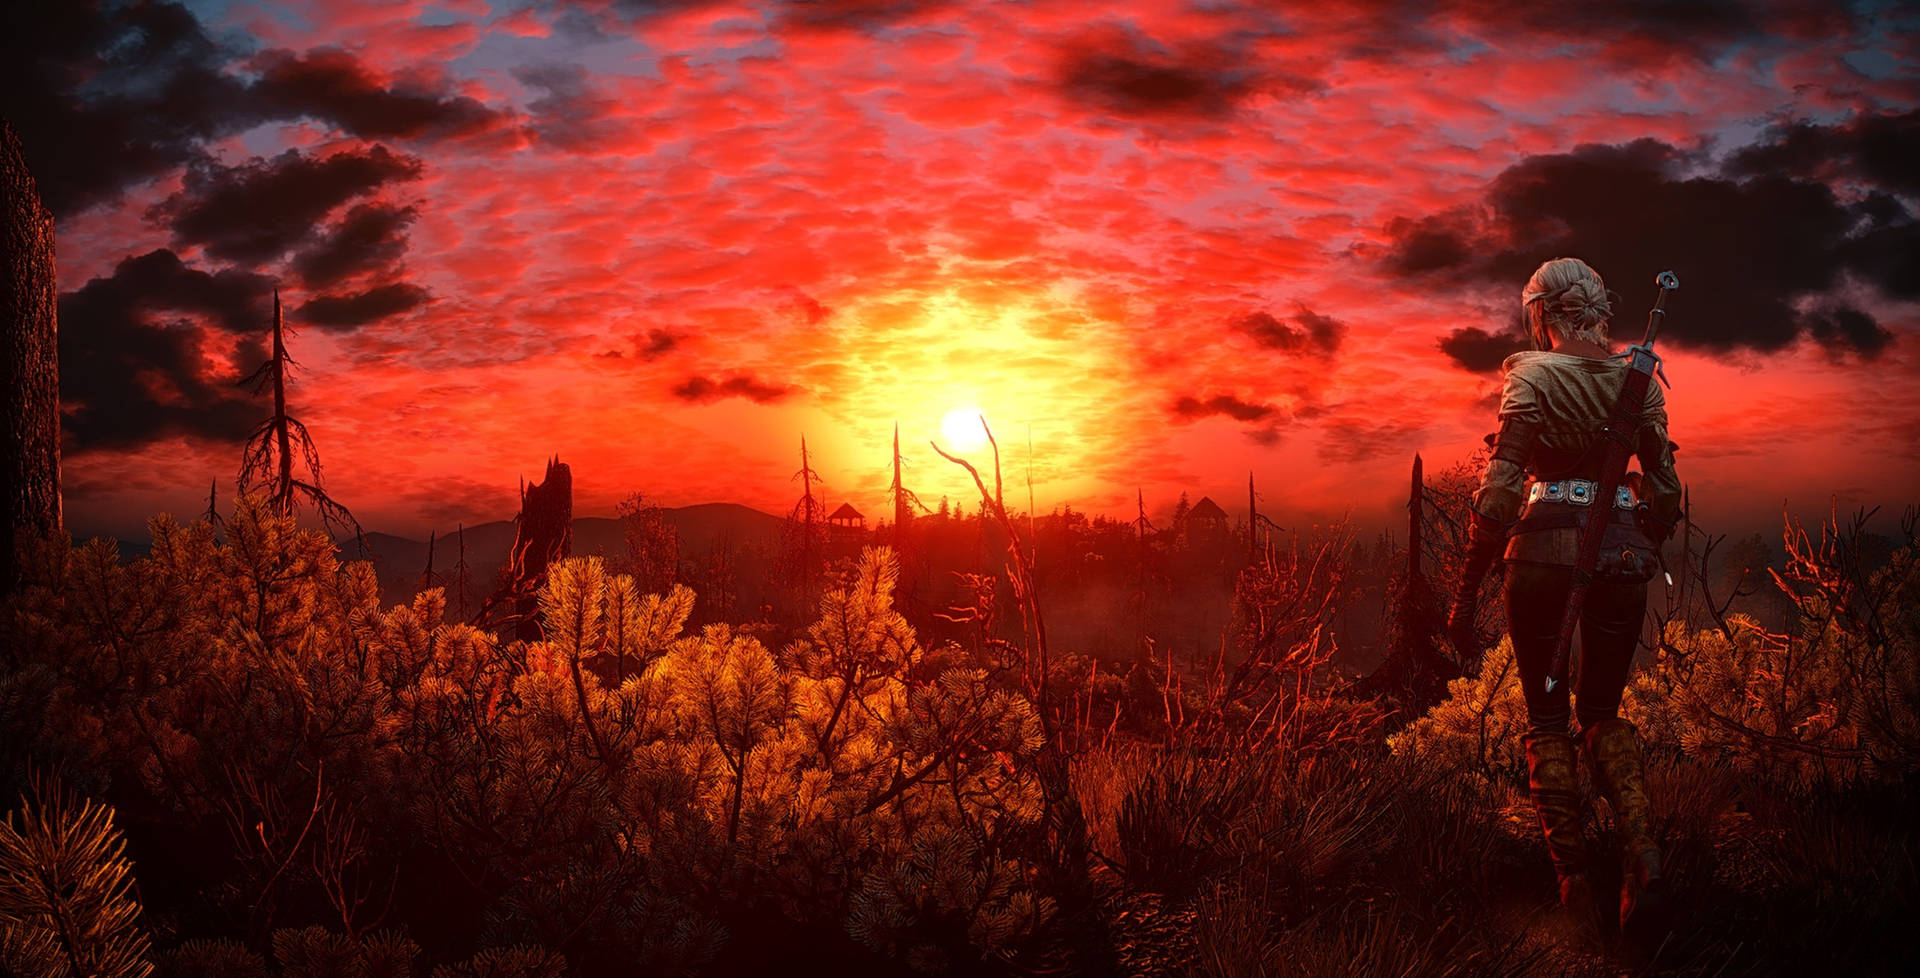 "A Blood Orange Sunrise on the Skellige Isles, as seen in Witcher 3" Wallpaper